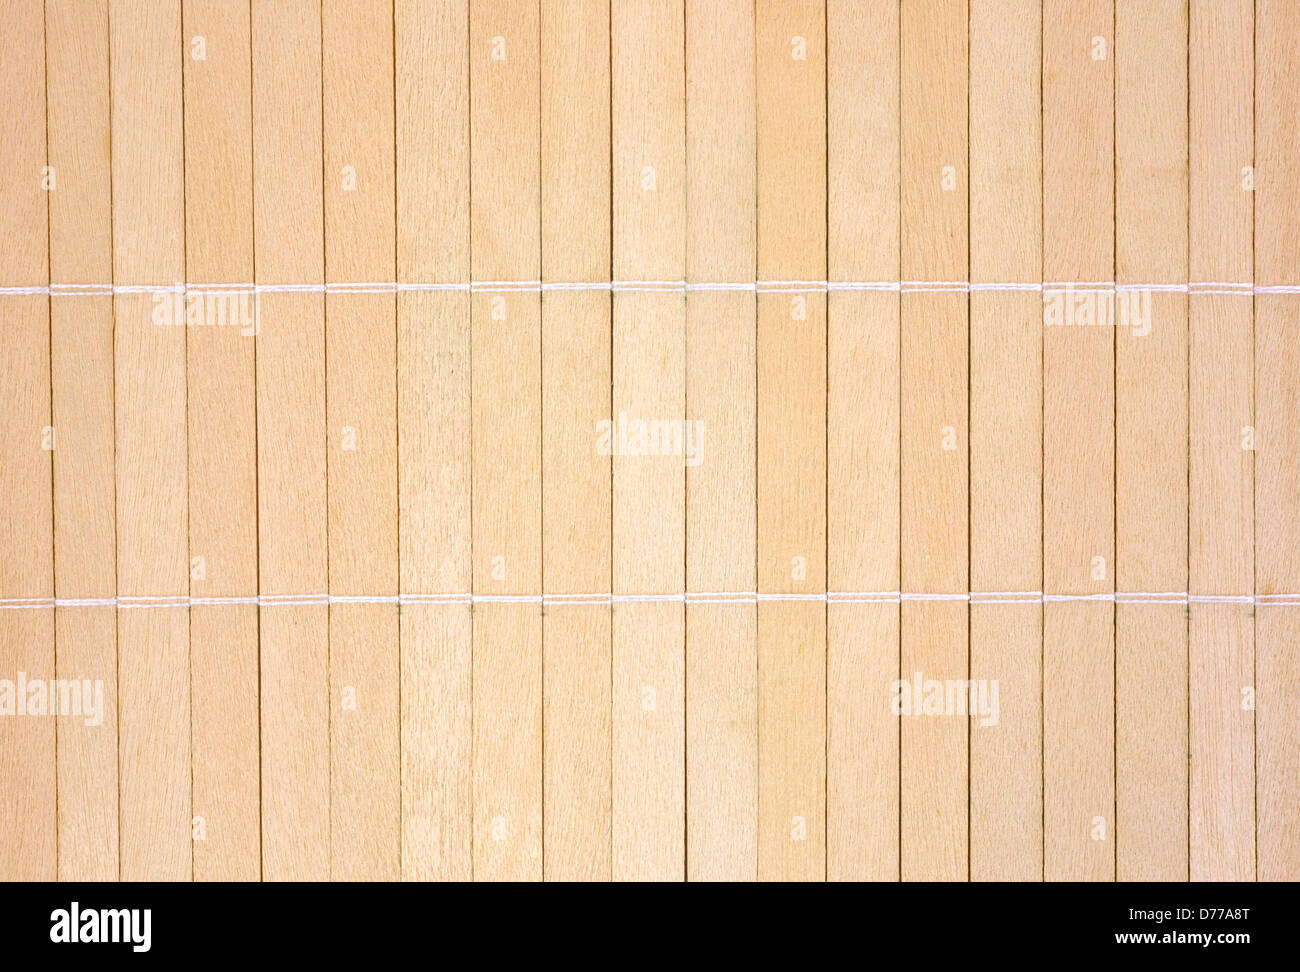 A background of wood slats that have been joined together with thread. Stock Photo